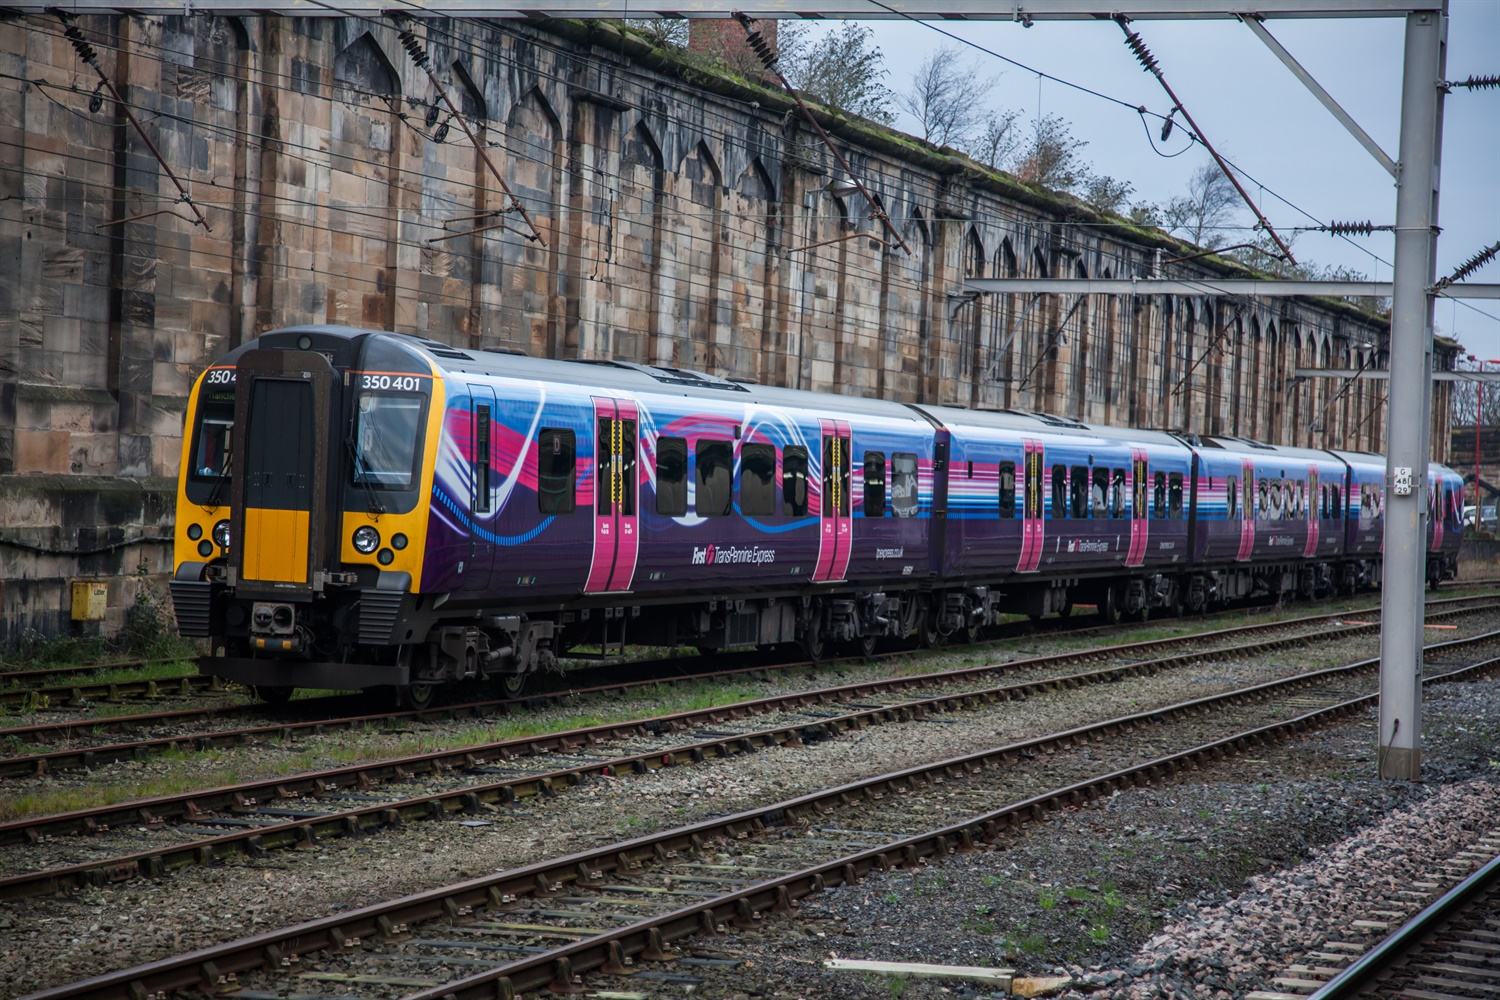 Urgent clarity needed amid claims that TransPennine electrification will be scrapped